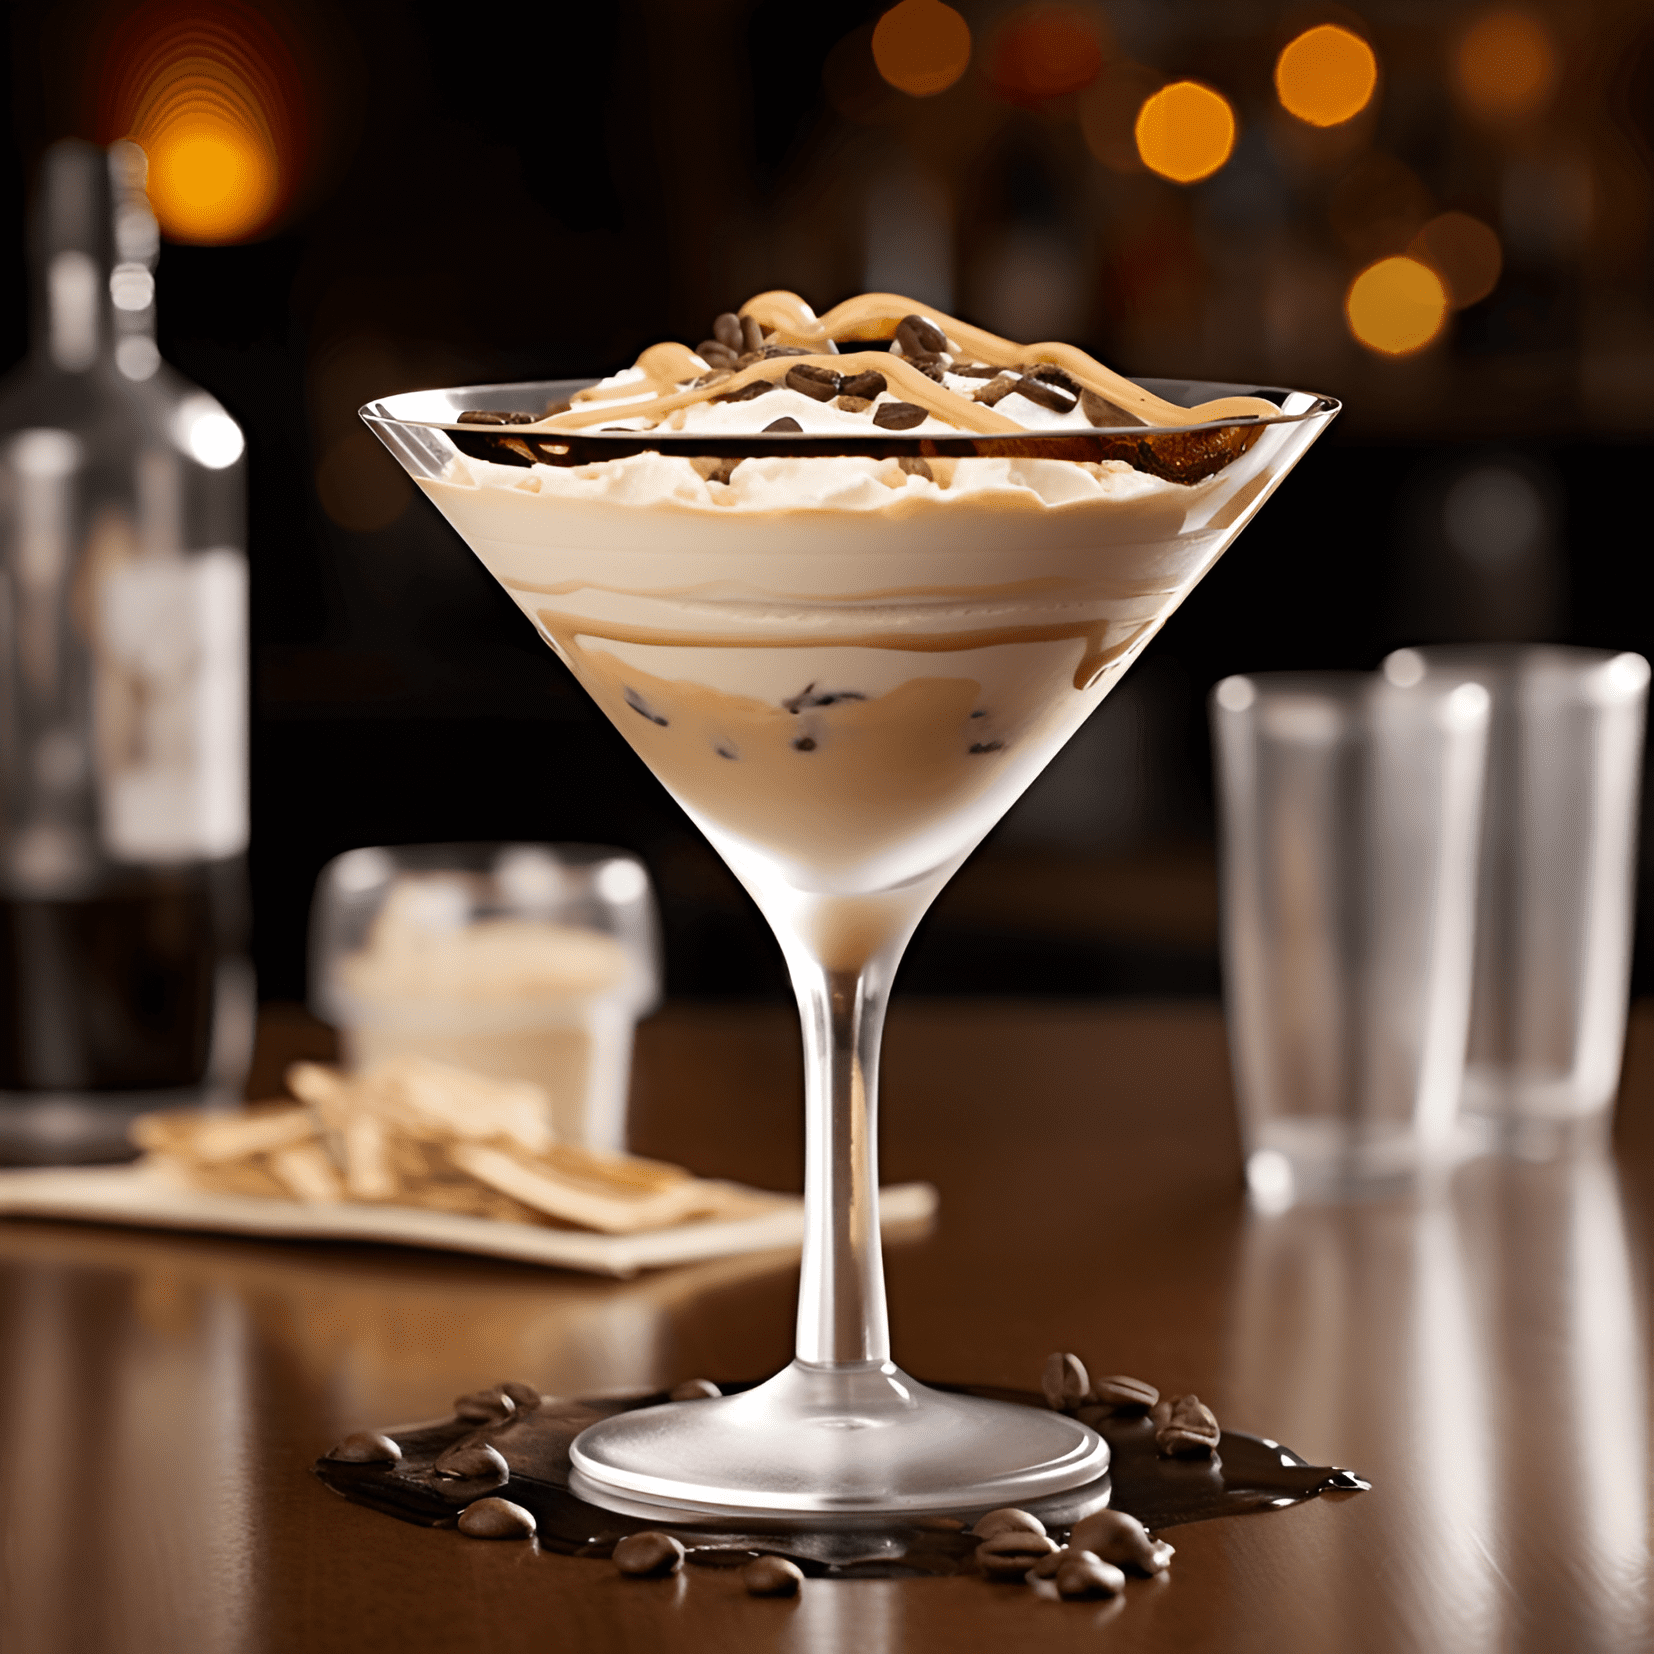 Heath Bar Cocktail Recipe - The Heath Bar cocktail has a rich, creamy, and sweet taste with a hint of toffee and chocolate. It's smooth and velvety, with a slight warmth from the alcohol.